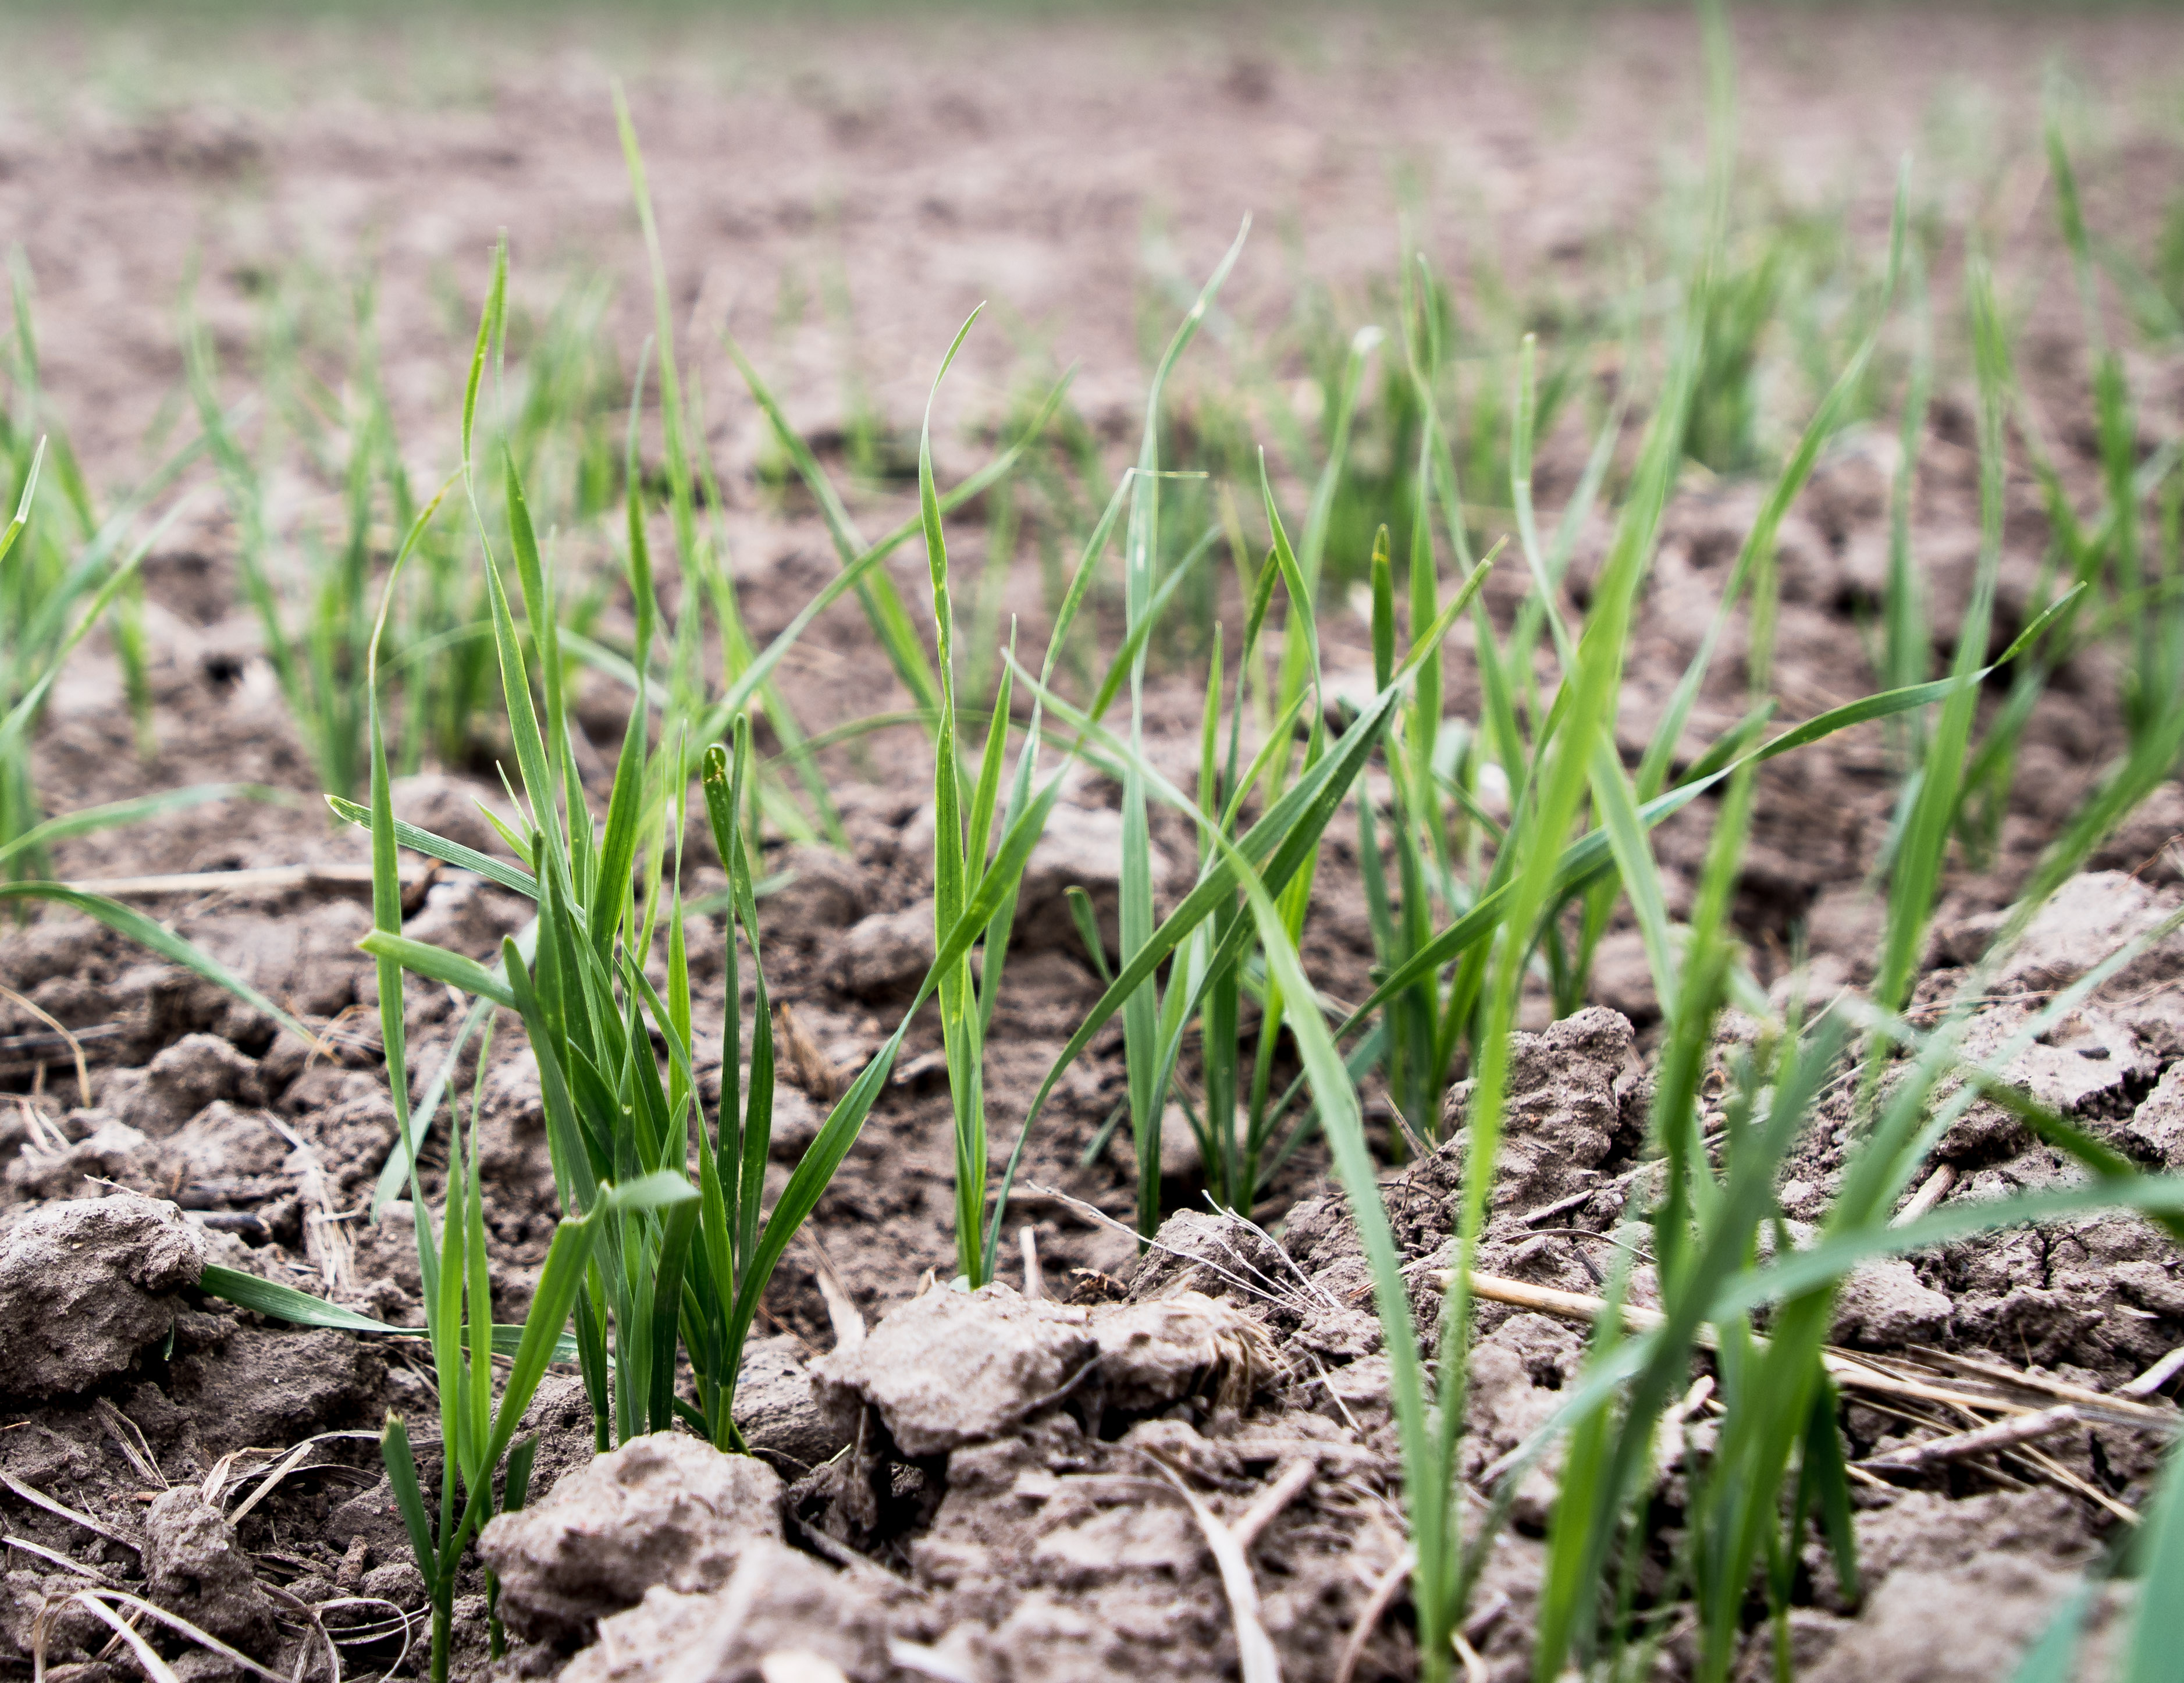 Young white winter wheat shoots emerge in Kansas